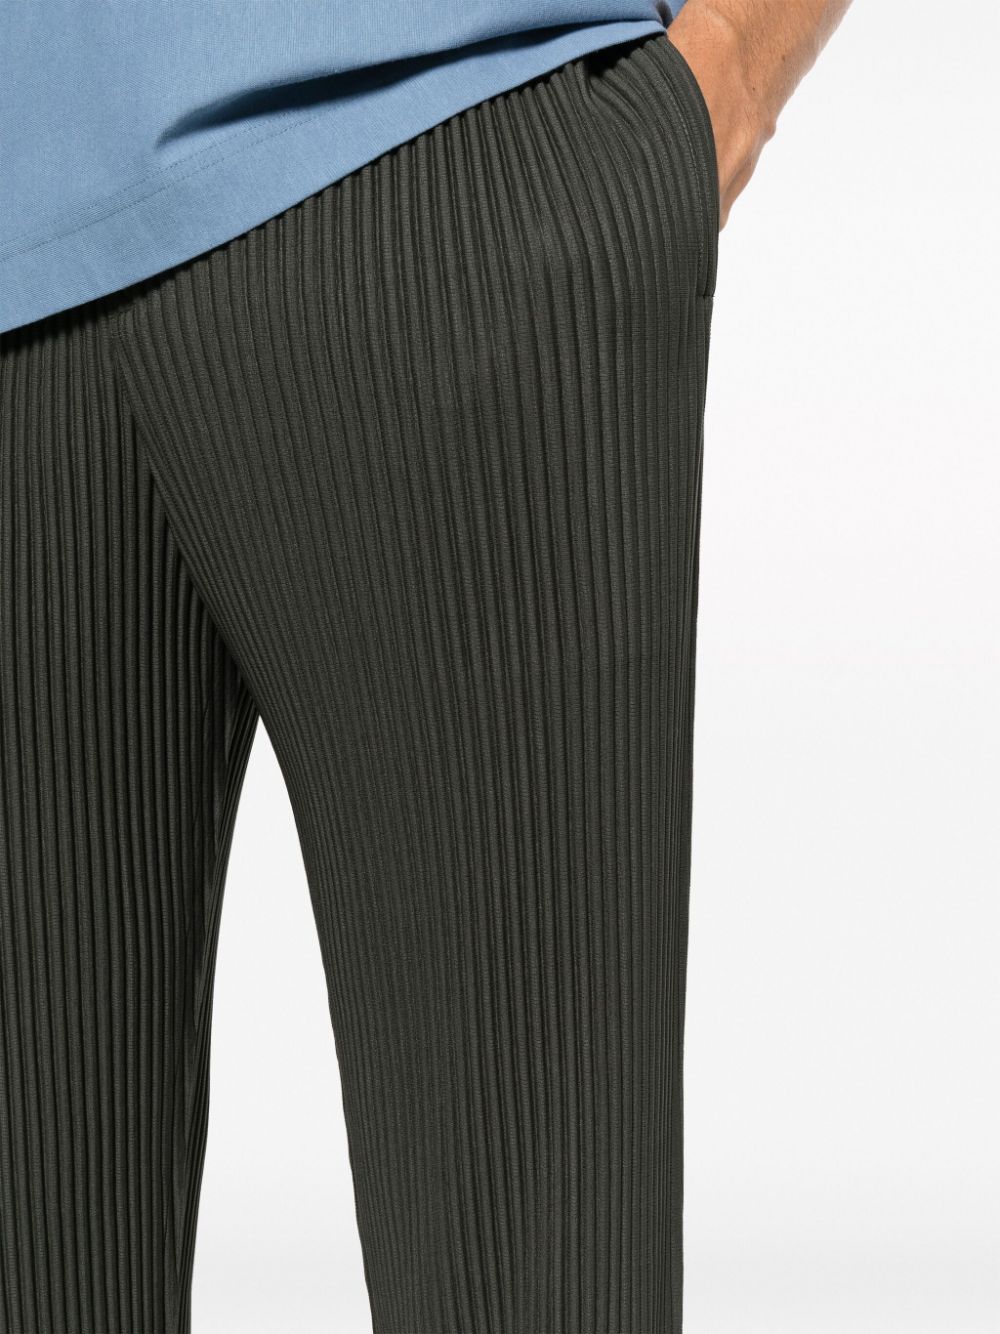 HOMME PLISSÉ ISSEY MIYAKE-TAILORED PLEATS 1-HP38JF152 65